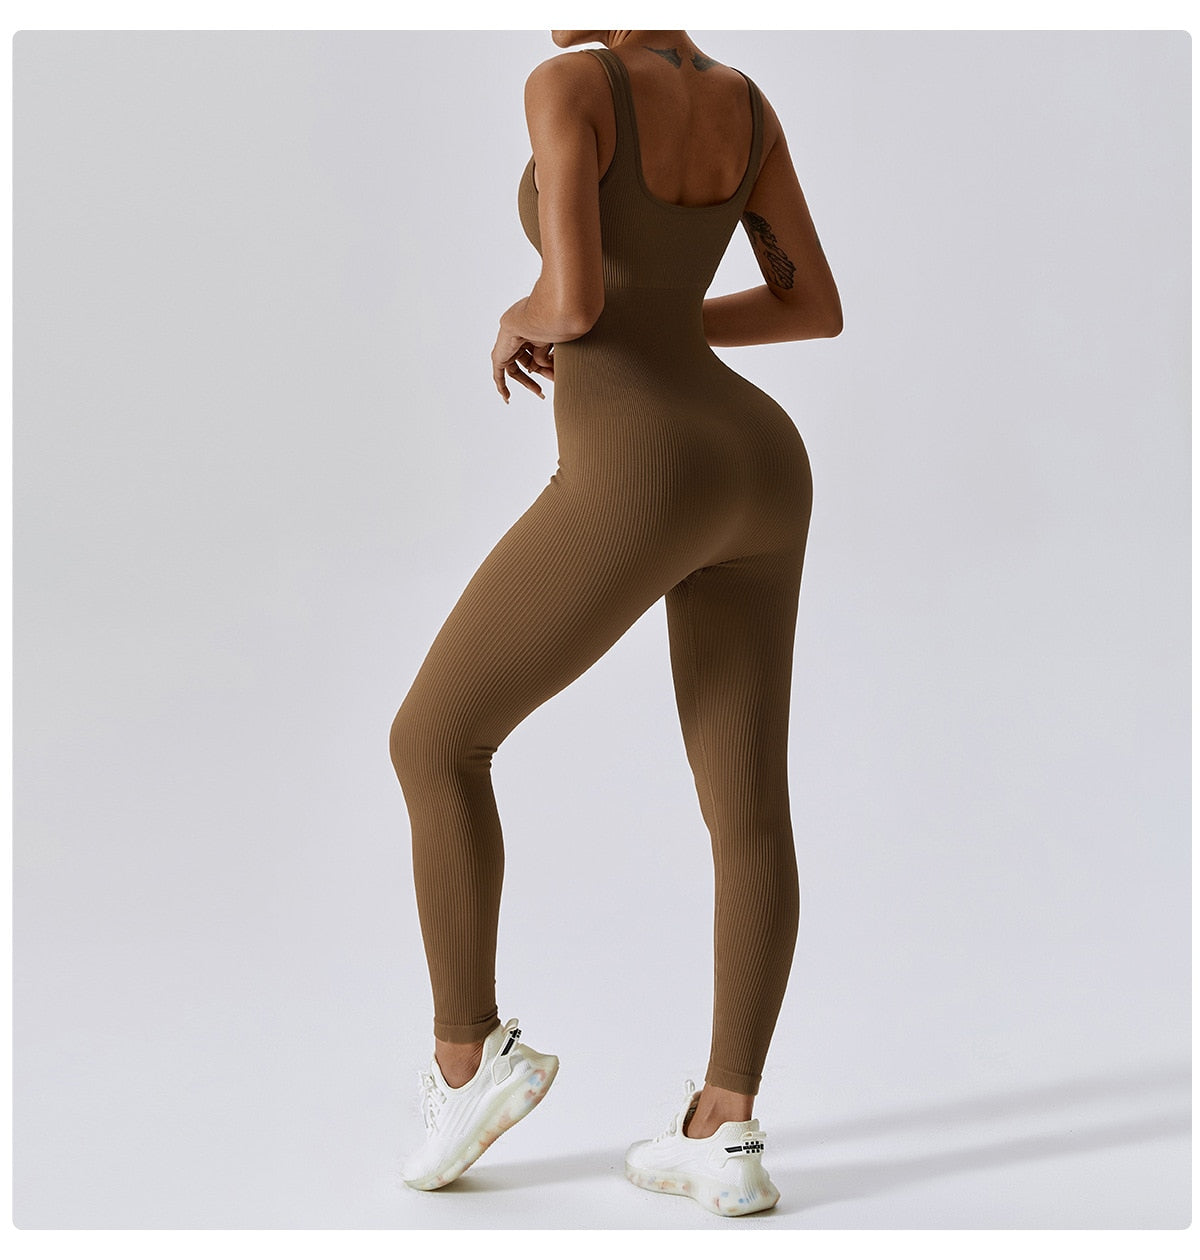 Spring Seamless One-Piece Yoga Clothes Sportswear Women's Gym Push Up Workout Clothes Fitness Sports Stretch Bodysuit Yoga Suit The Clothing Company Sydney